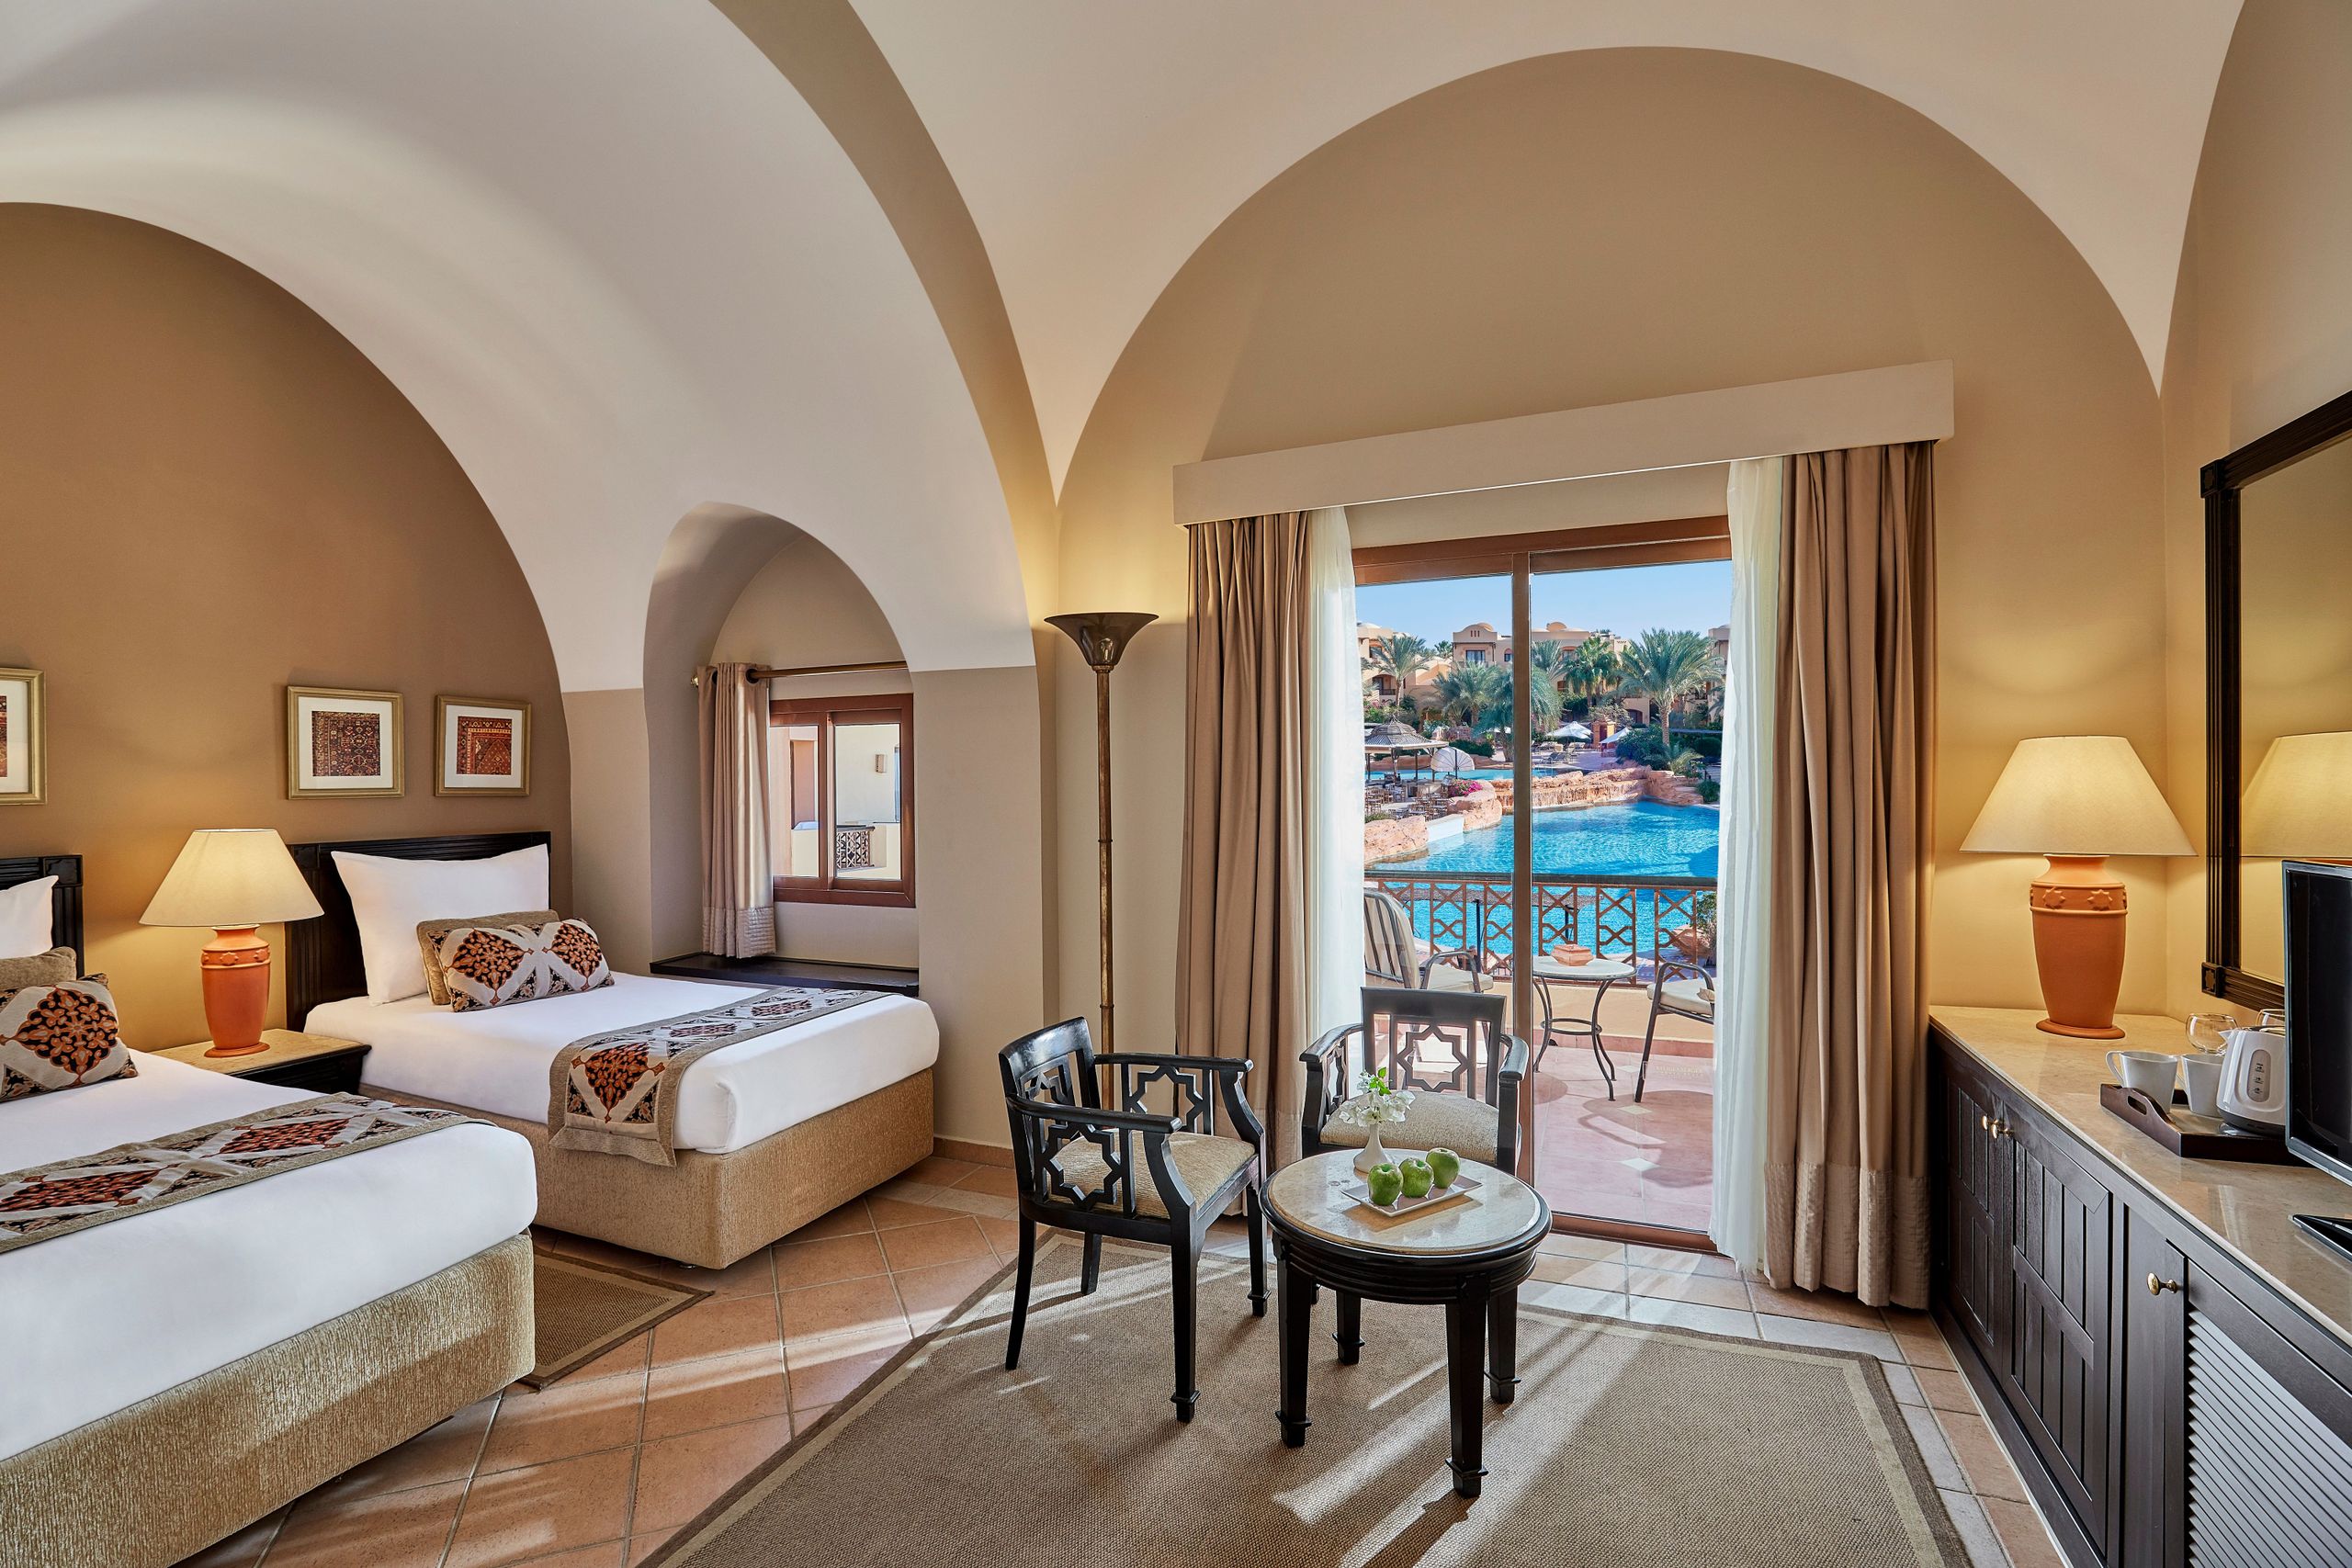 Steigenberger Coraya Beach Hotel, Marsa Alam - Superior room pool-view with two separate beds